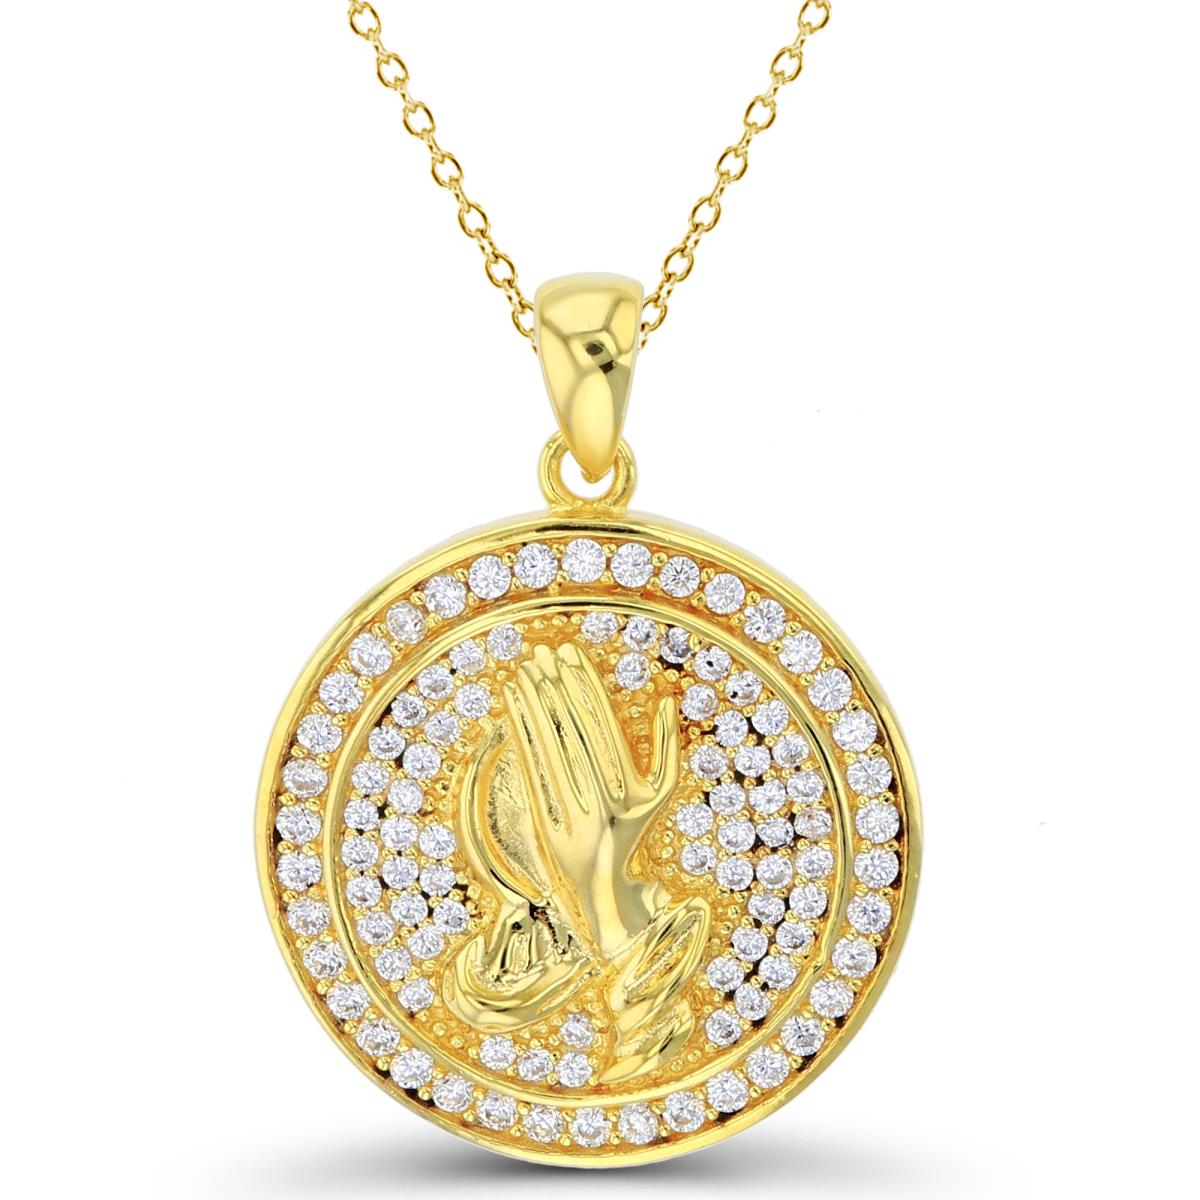 Sterling Silver+1Micron Yellow Gold High Polish Praying Hands on Rnd White CZ Pave Circle 18"Necklace